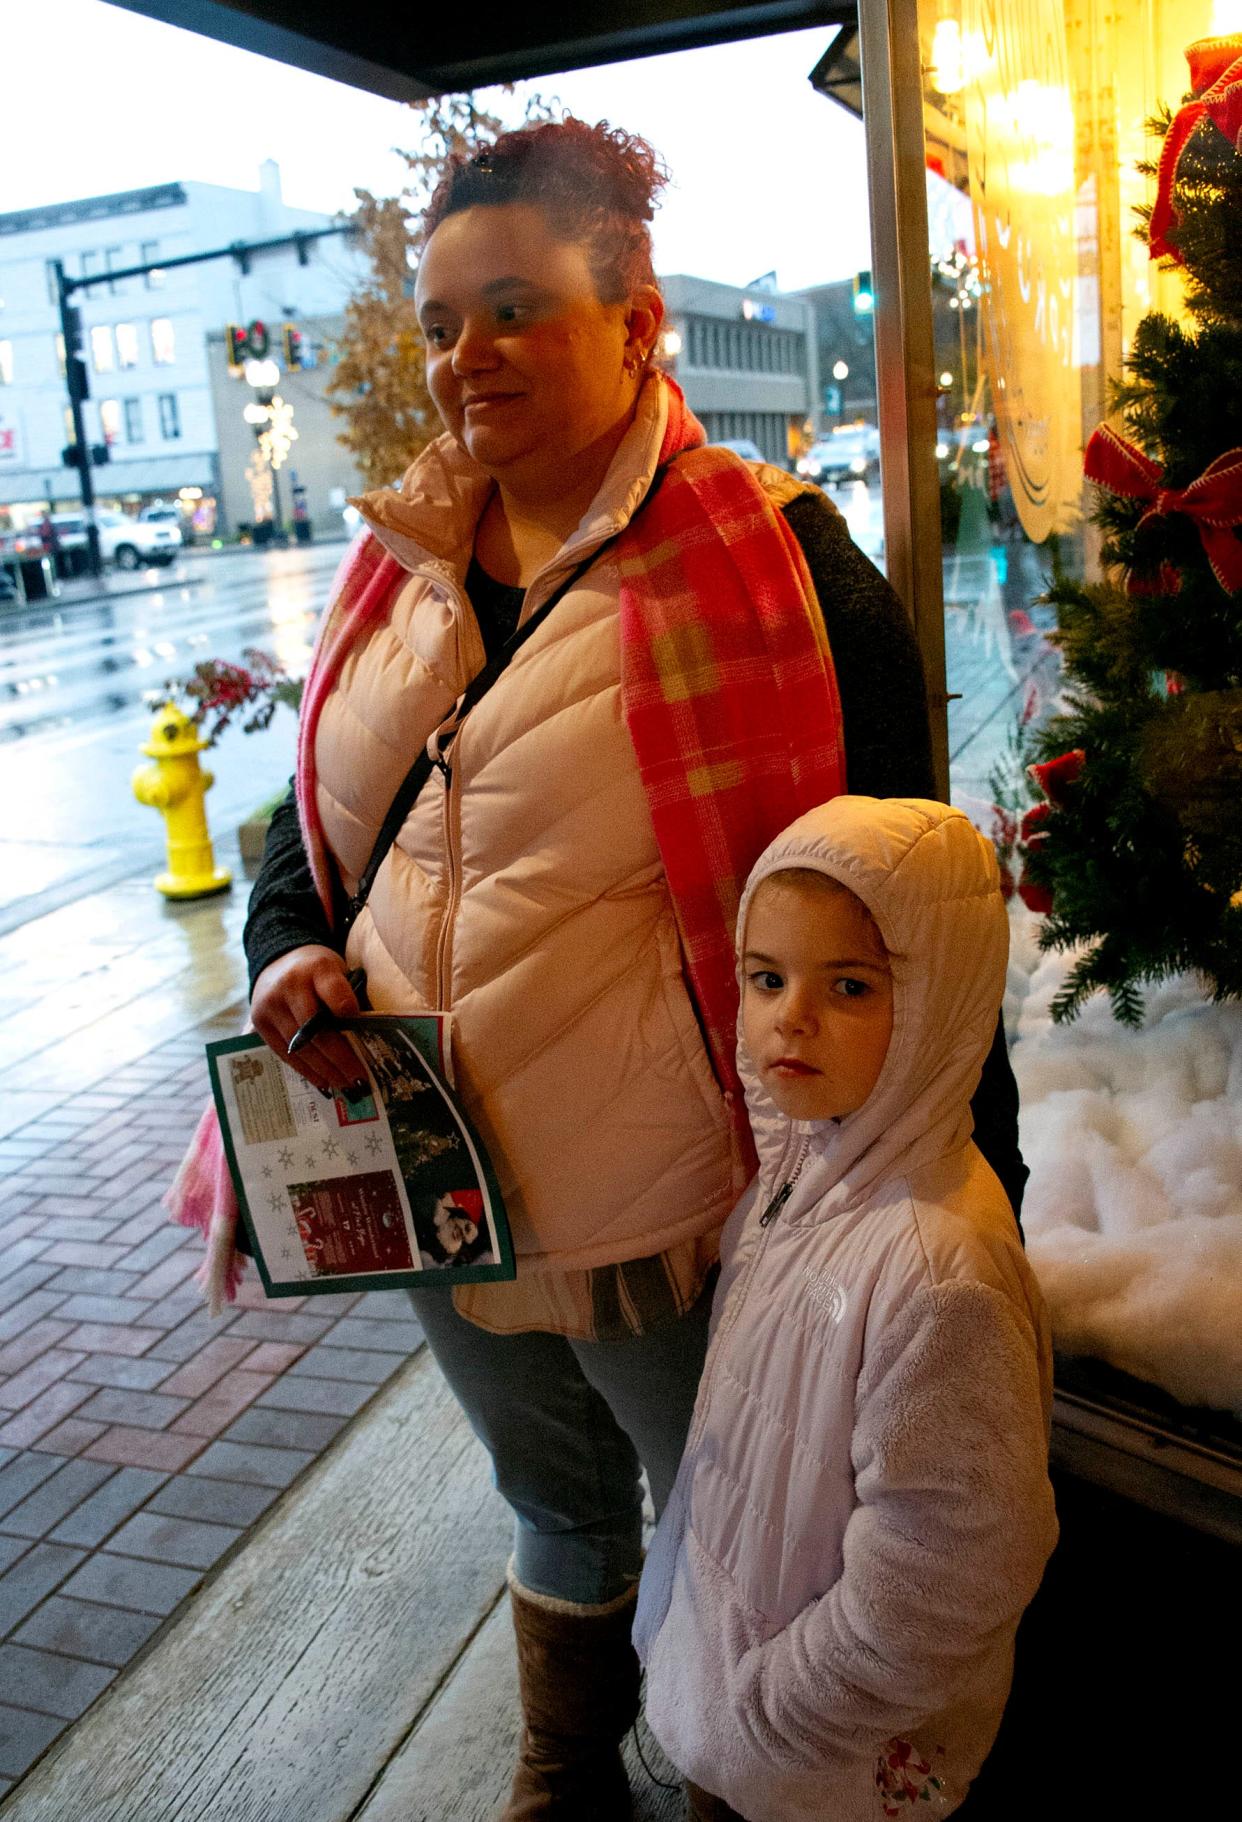 Aubrey Freyman and daughter Gracelyn are busy looking for Elf on the Shelf in the scavenger hunt in downtown stores.